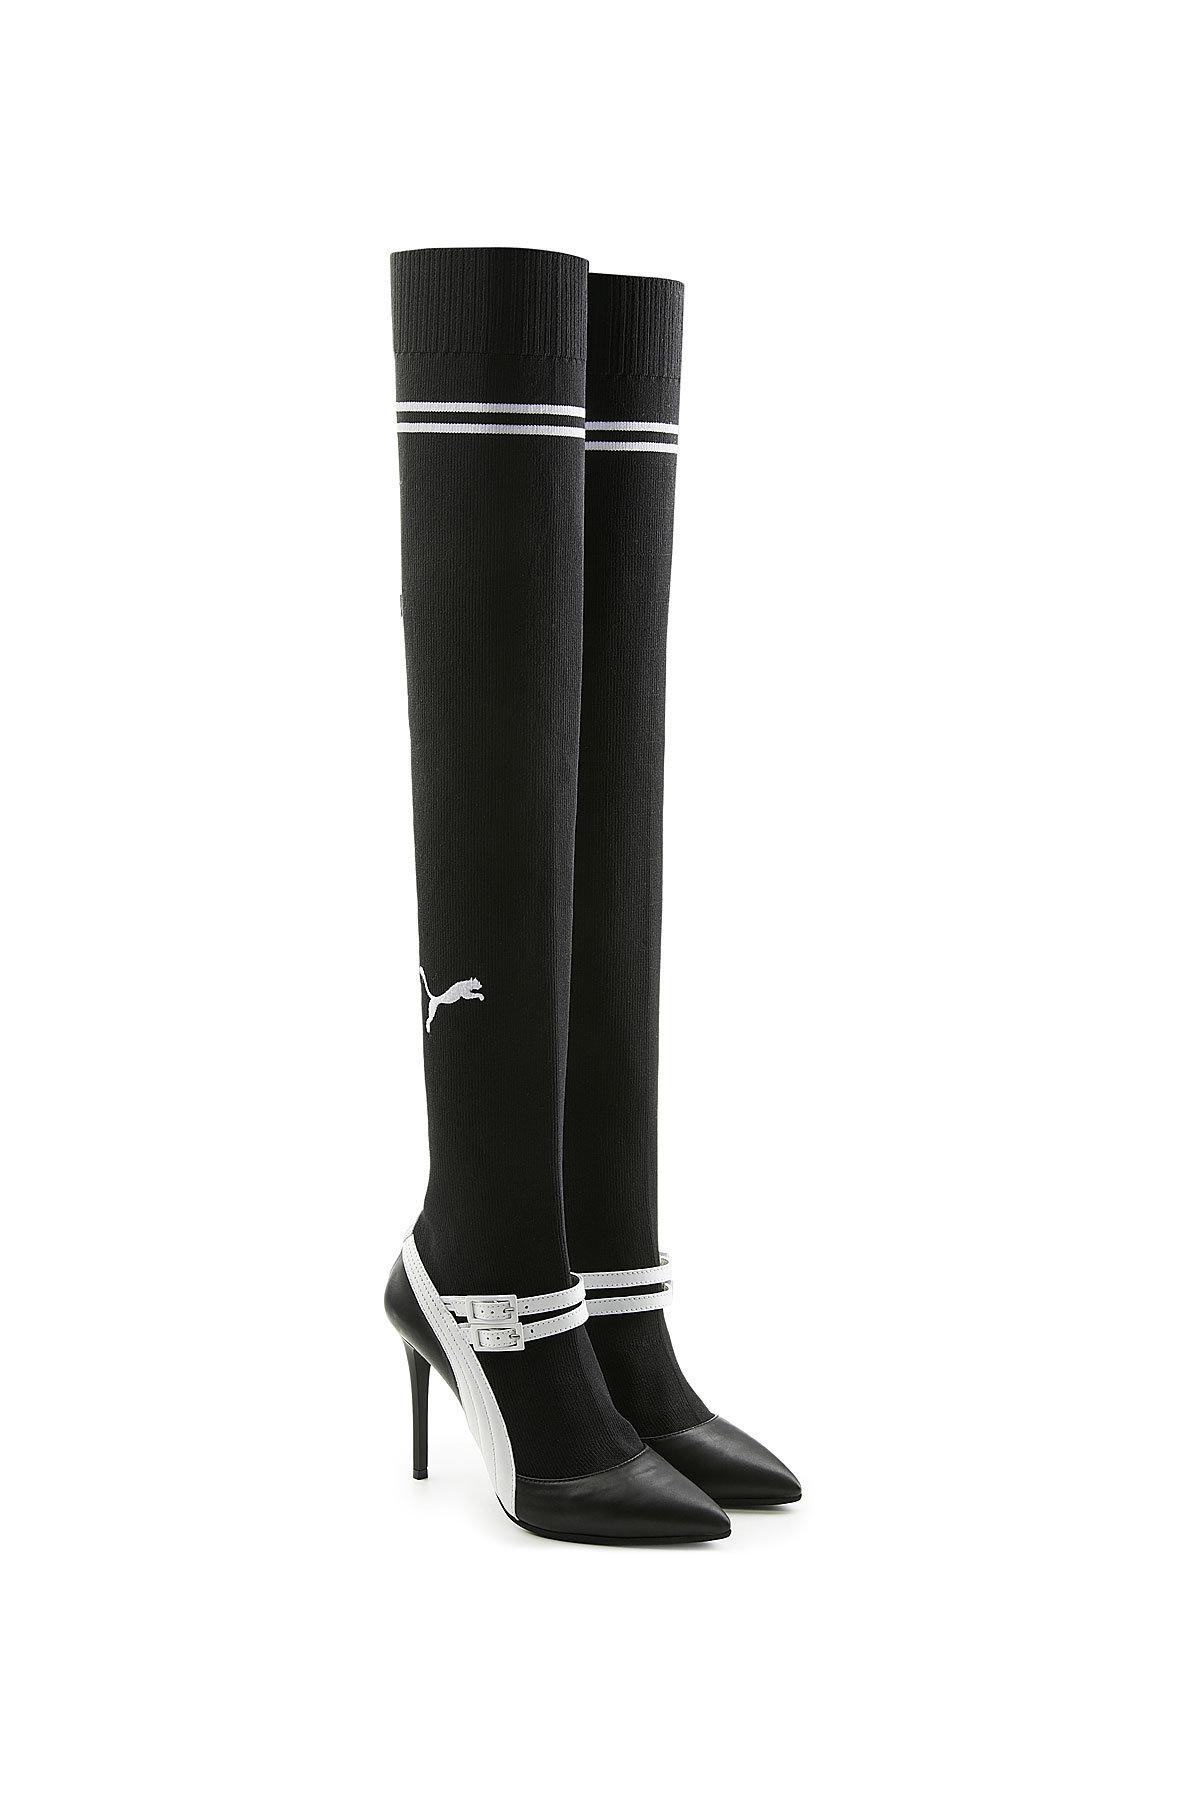 fenty over the knee boots